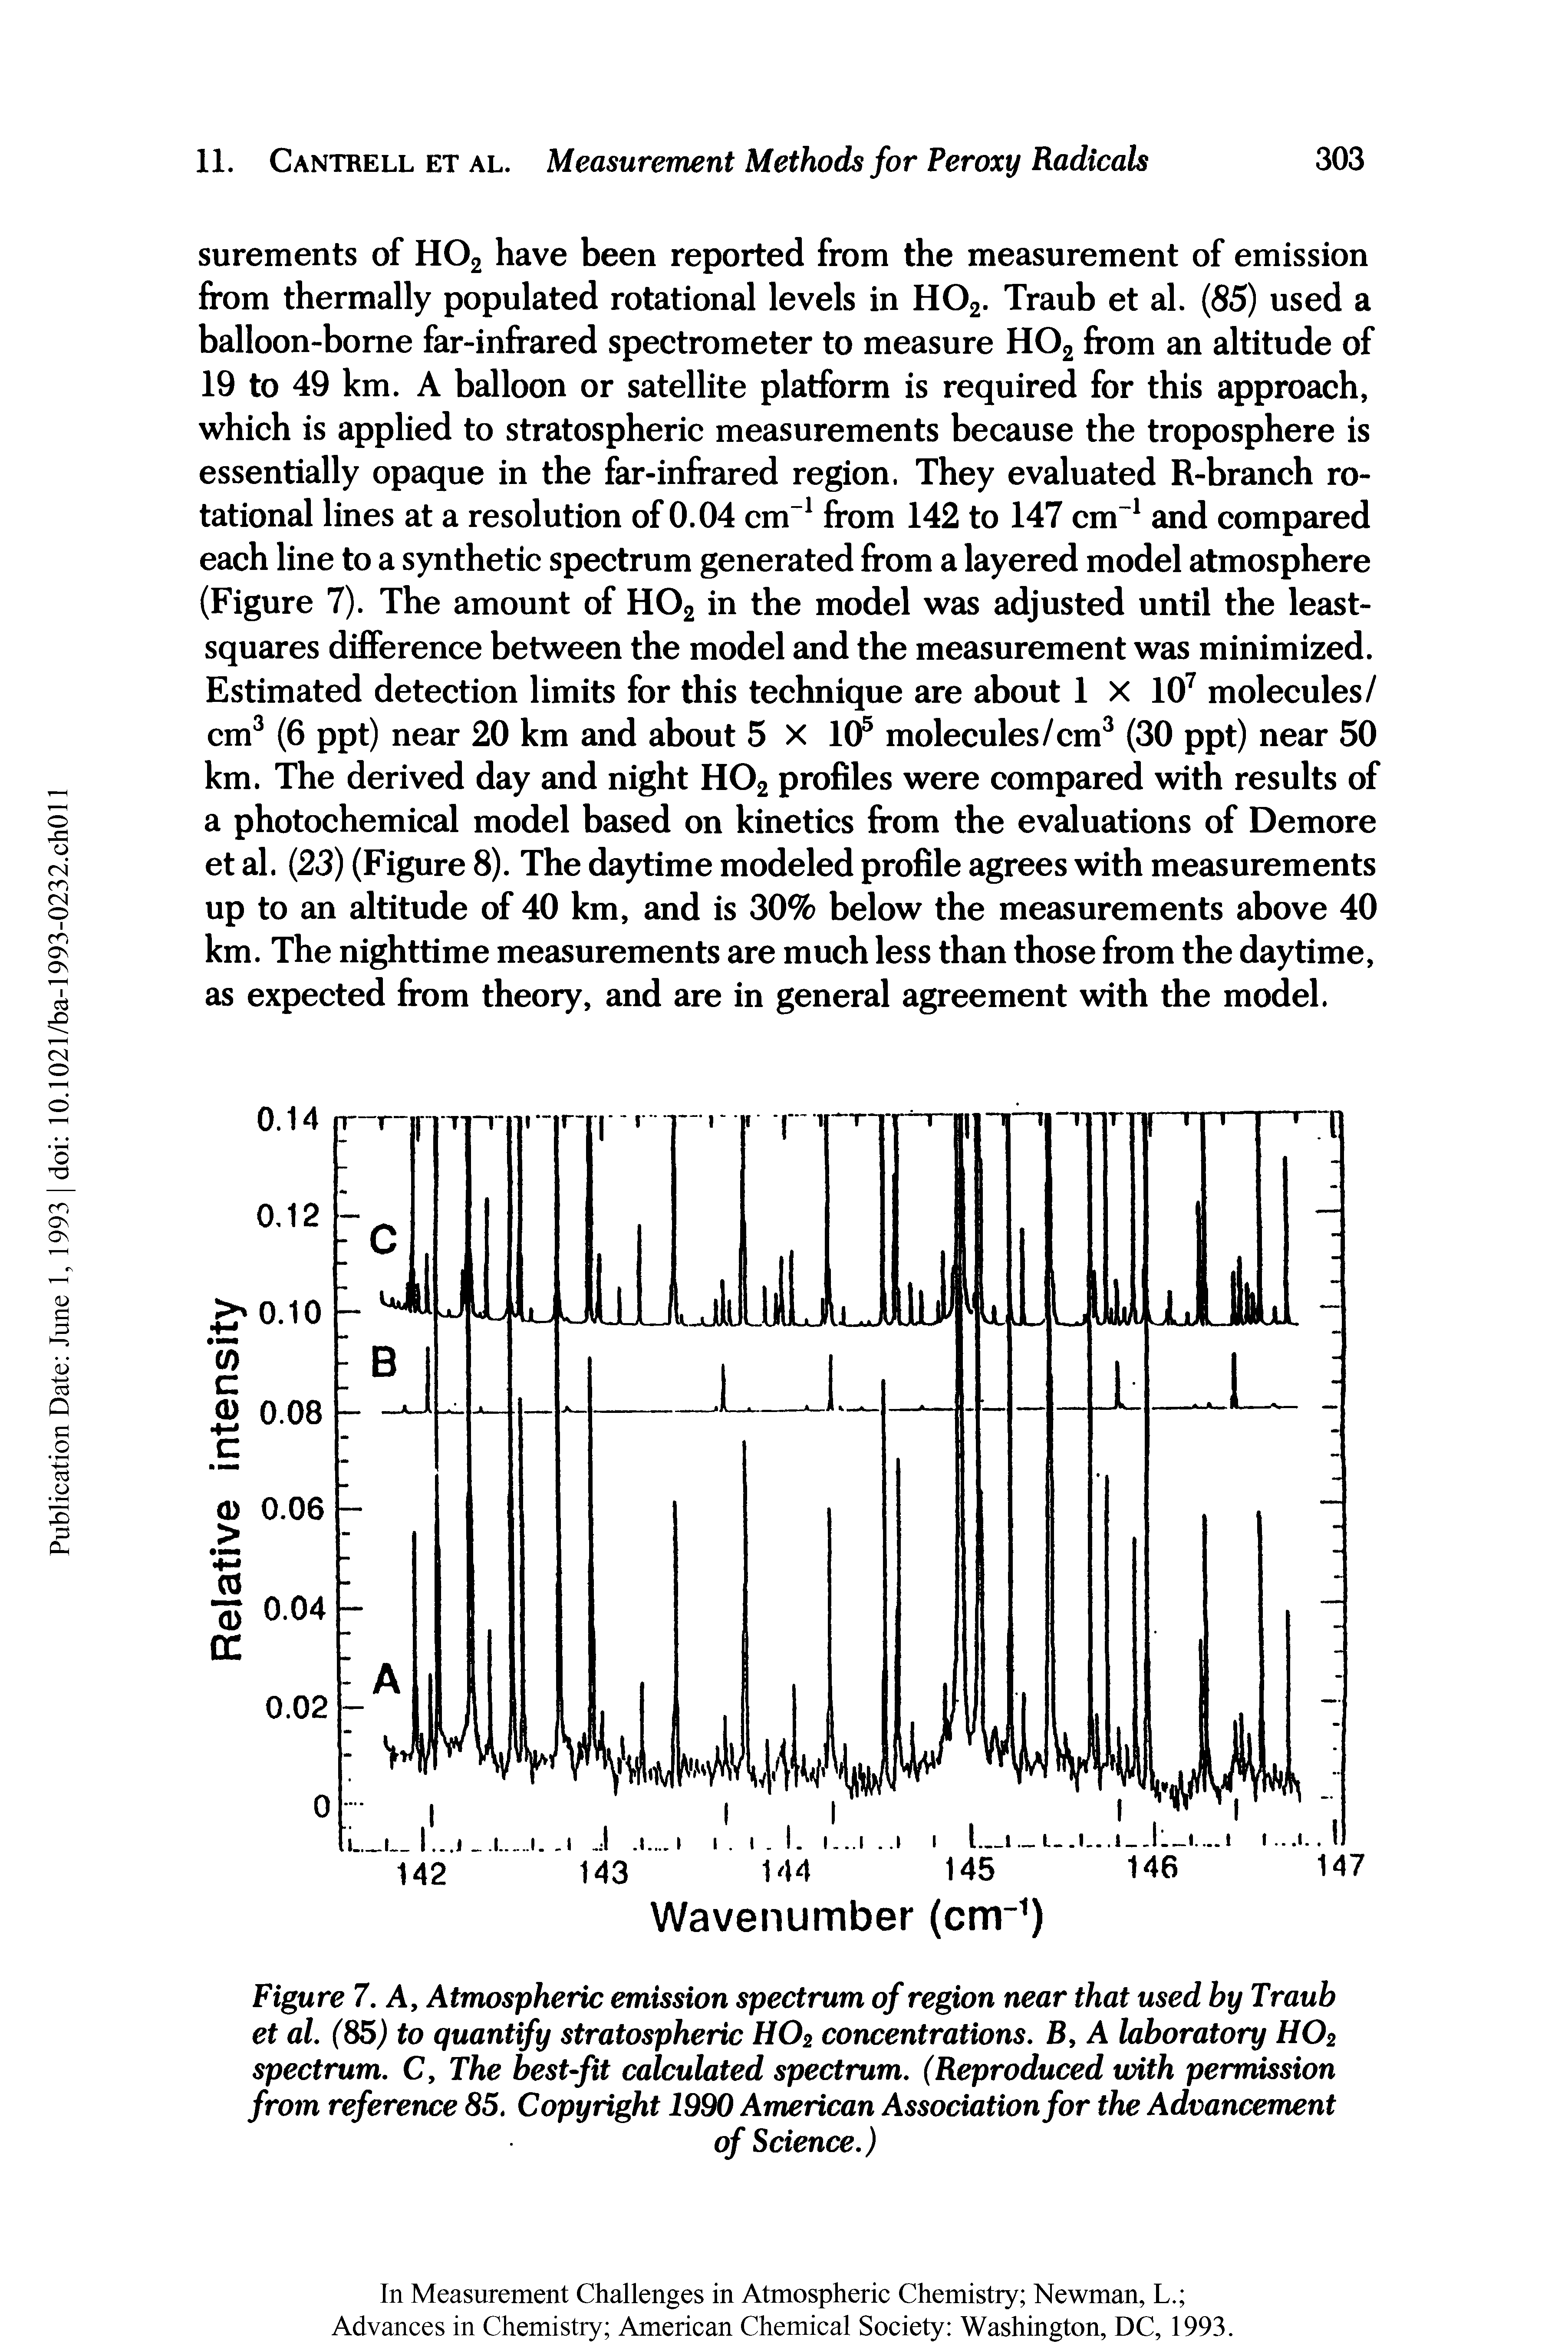 Figure 7. A, Atmospheric emission spectrum of region near that used by Traub et al. (85) to quantify stratospheric H02 concentrations. B, A laboratory H02 spectrum. C, The best-fit calculated spectrum. (Reproduced with permission from reference 85. Copyright 1990 American Association for the Advancement...